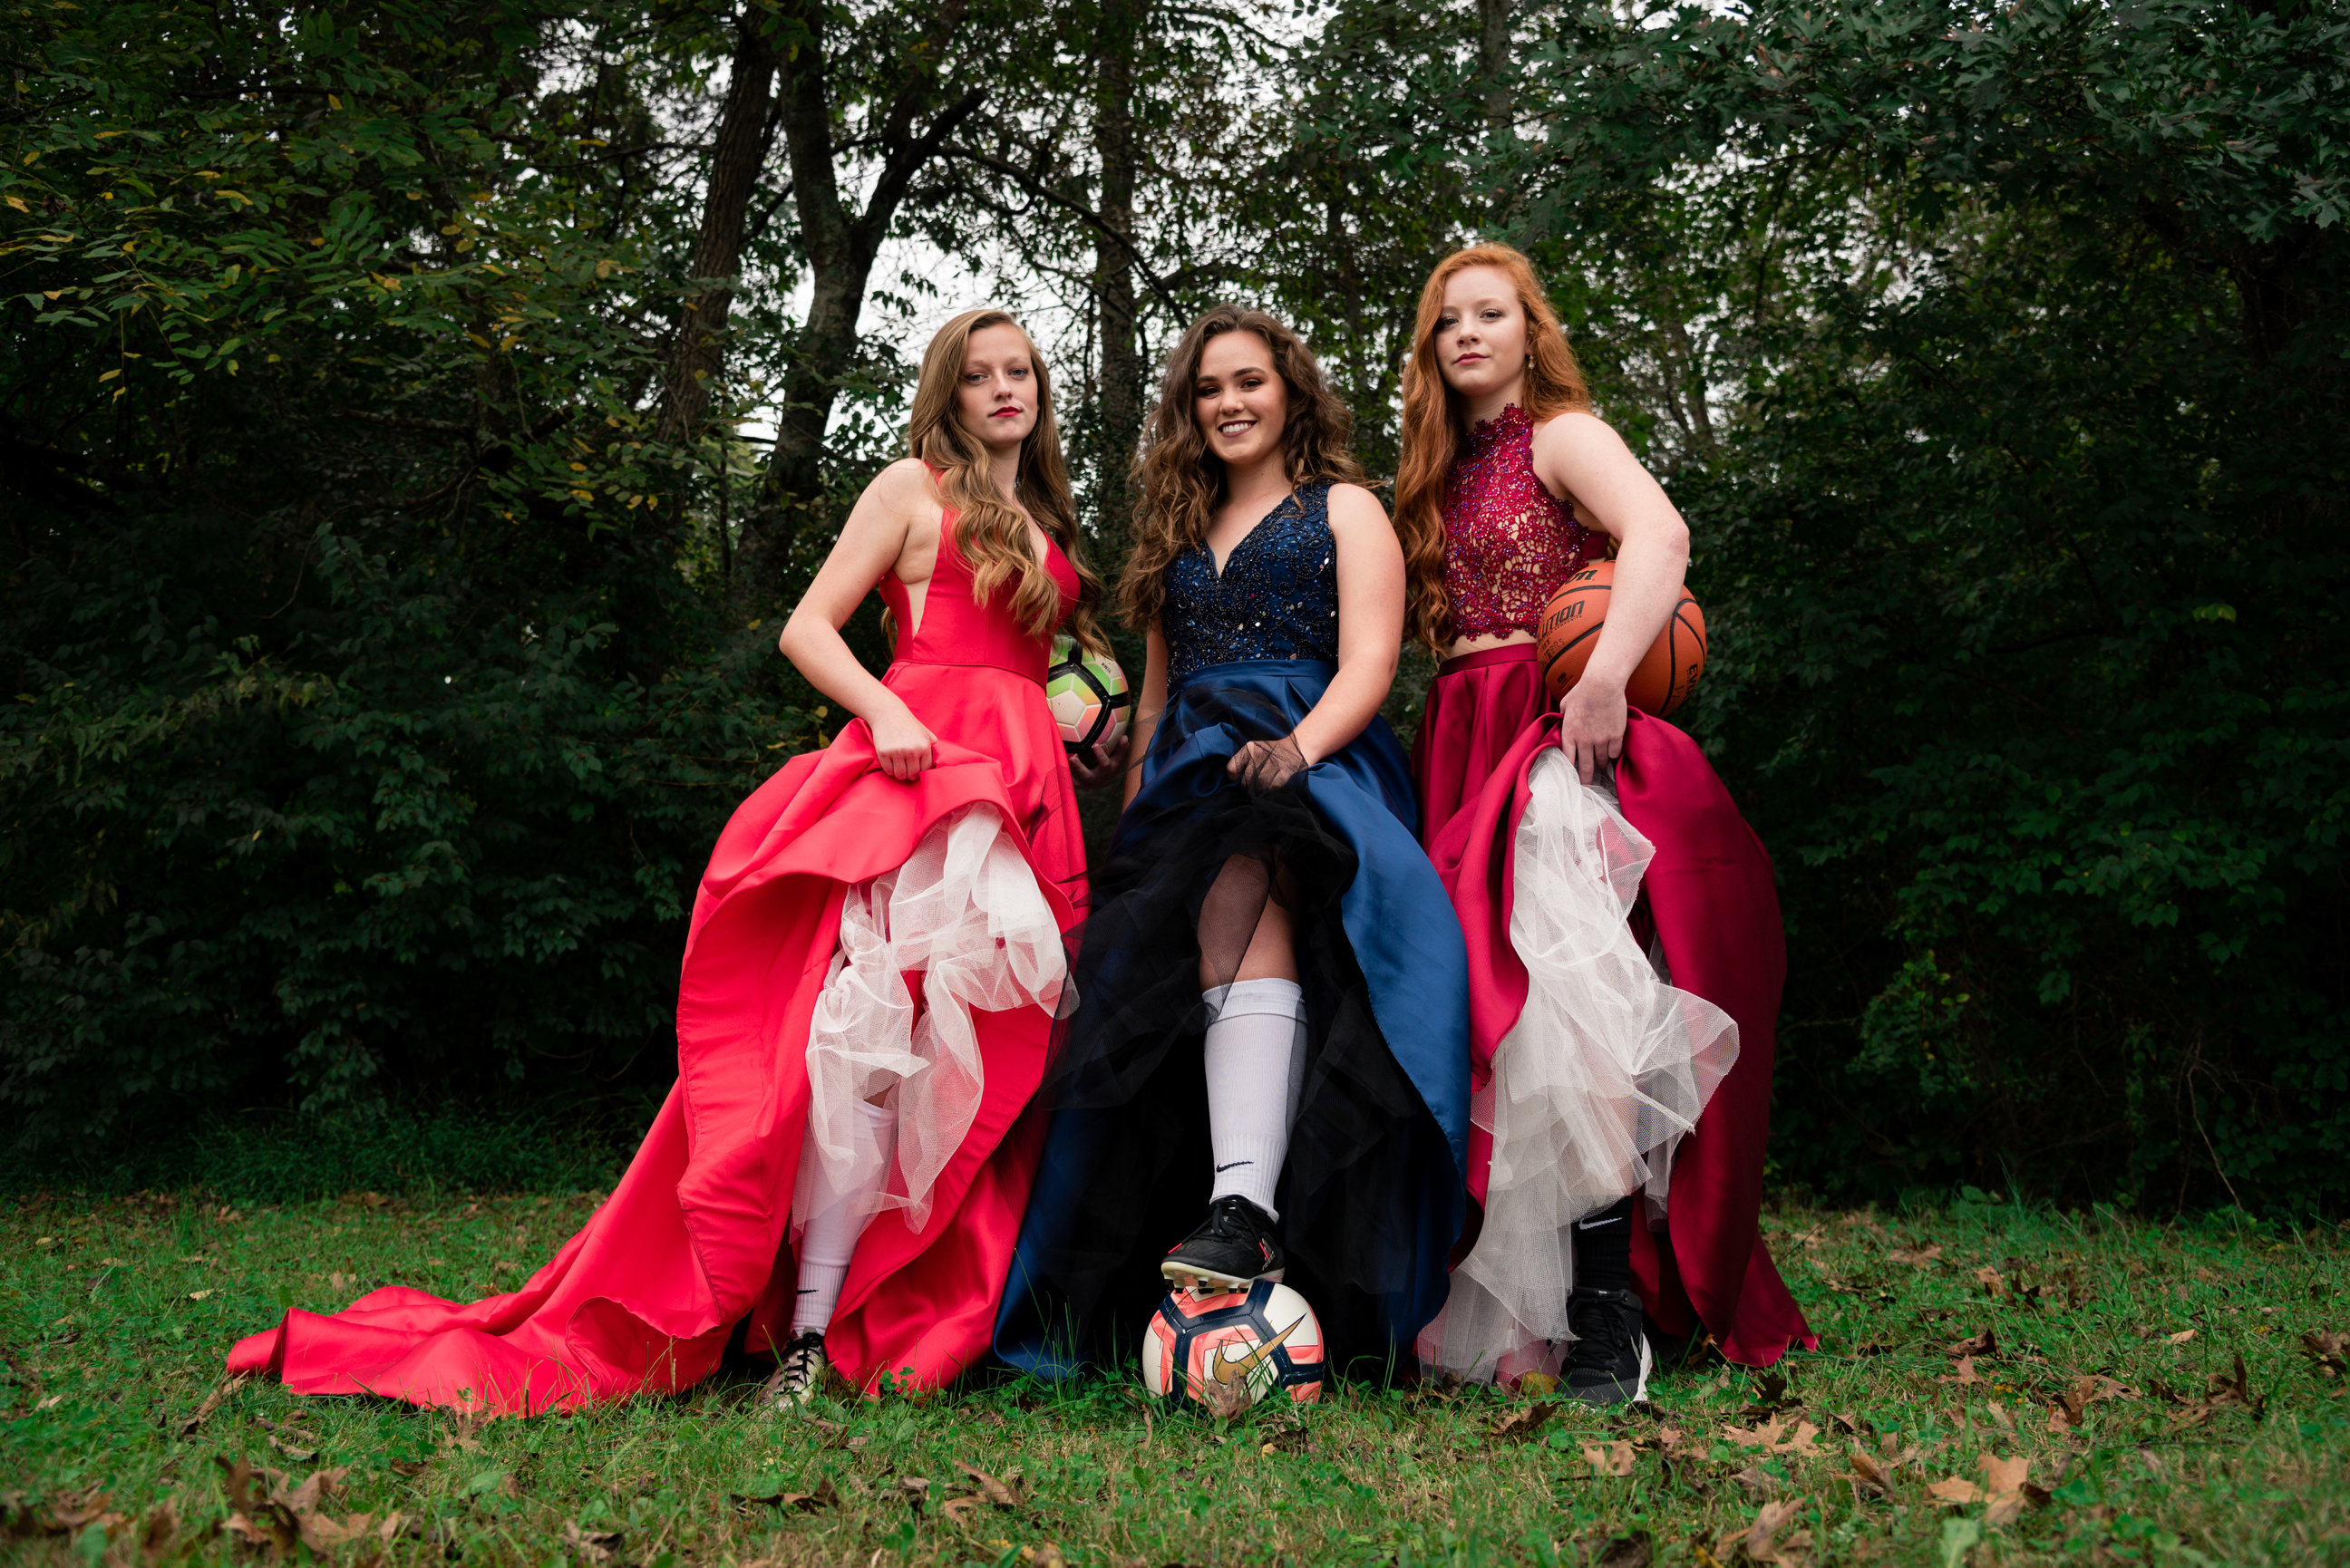 Stunning Prom Poses for Your #SquadGoals